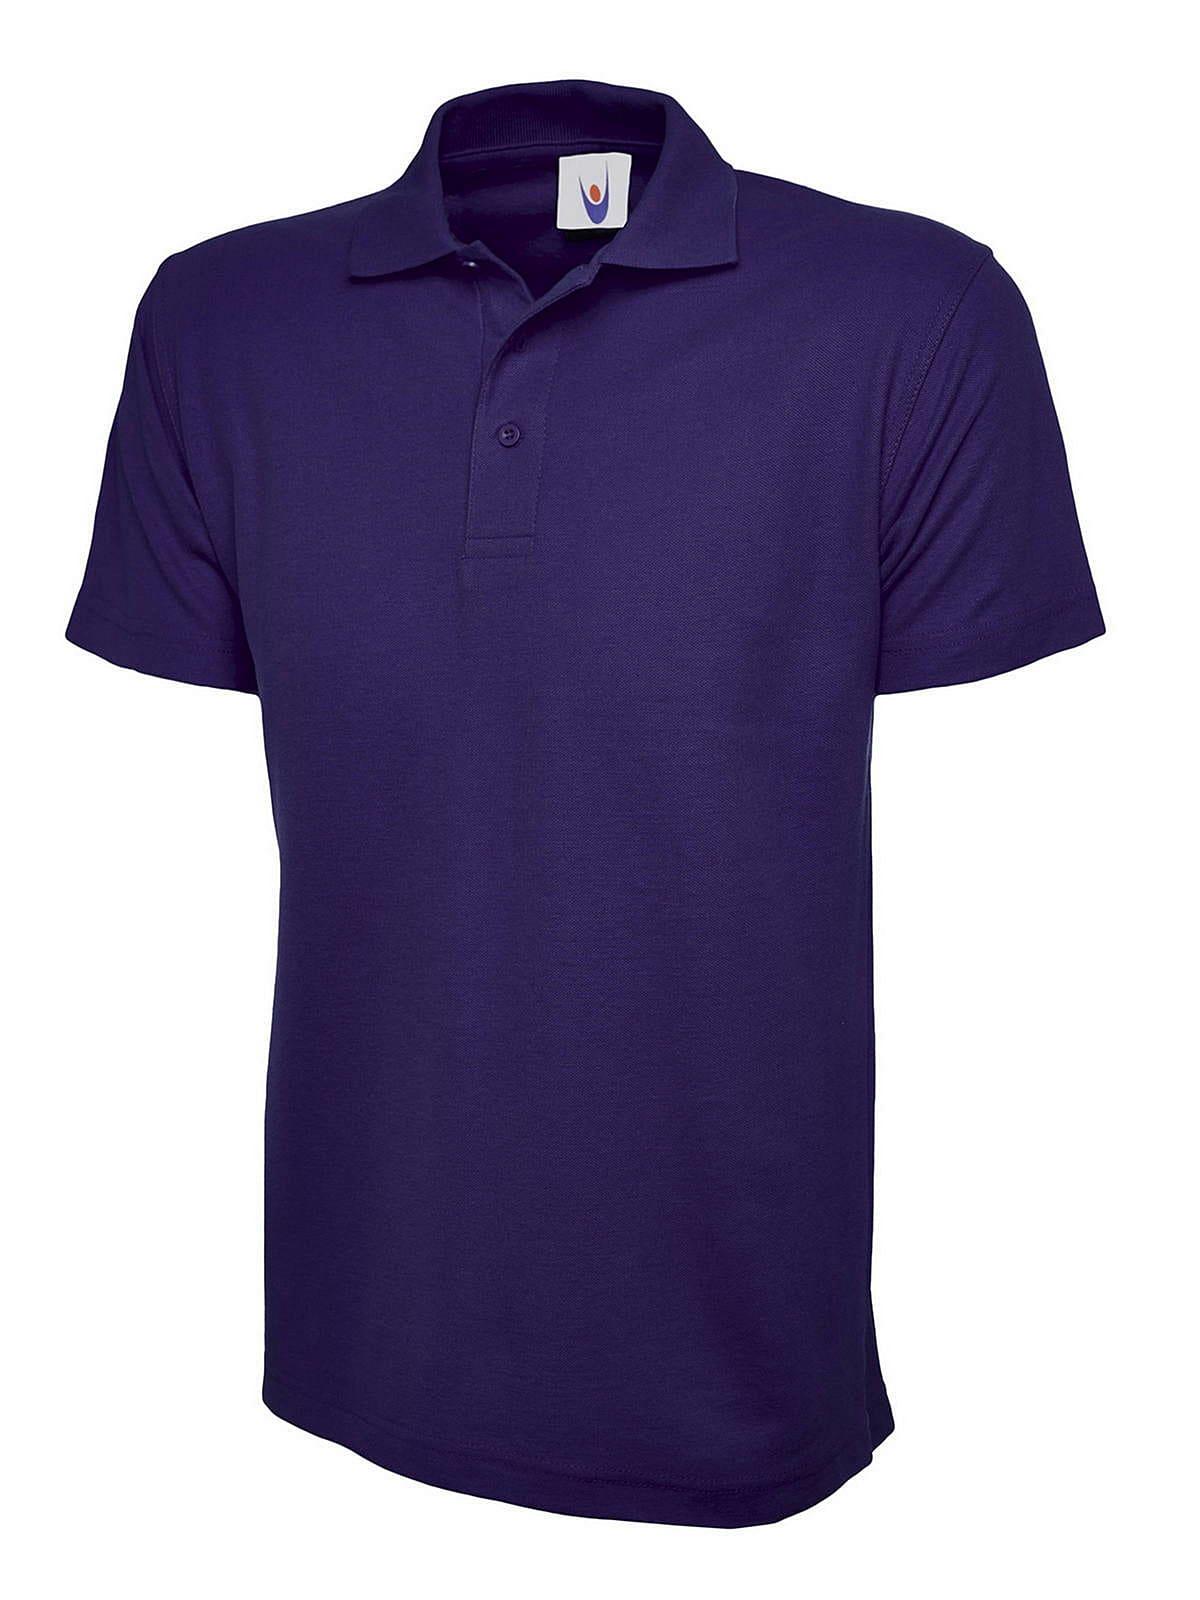 Uneek 220GSM Classic Polo Shirt in Purple (Product Code: UC101)